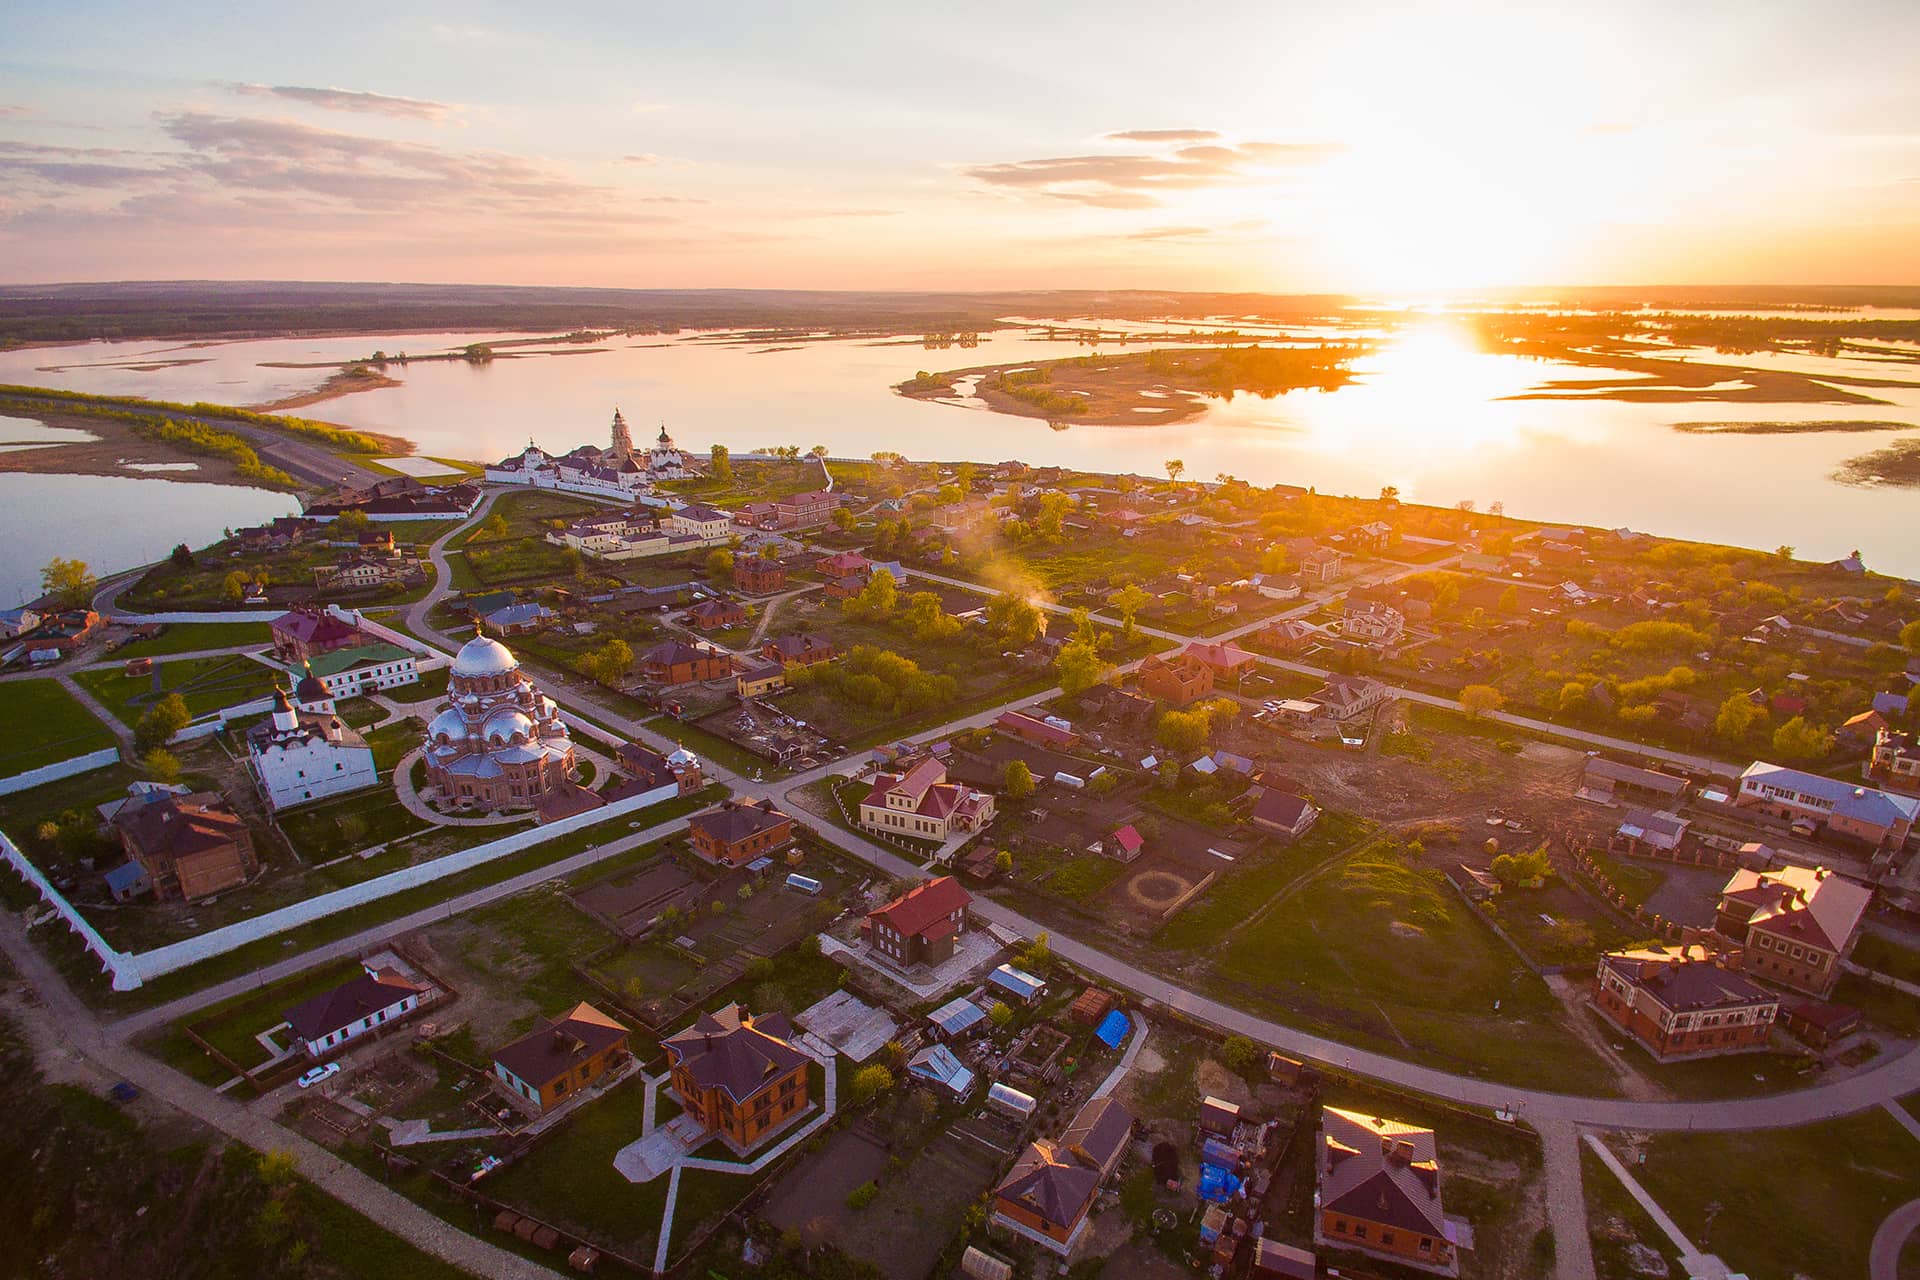 An island town with churches and small houses in Russia, view from the air during the sunset